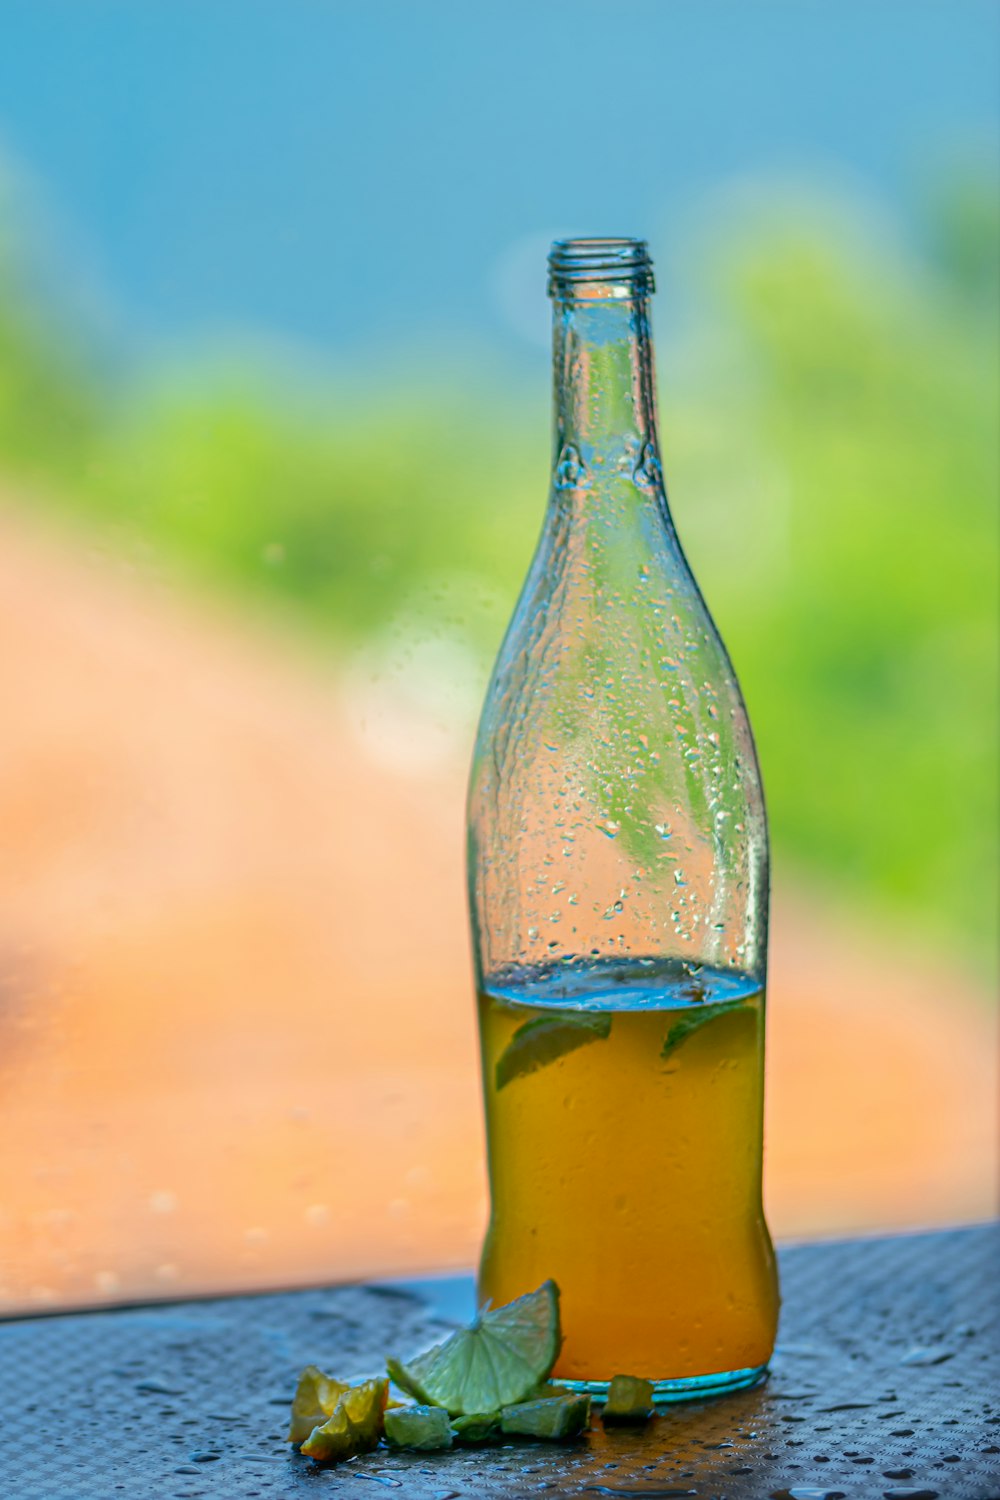 clear glass bottle with yellow liquid